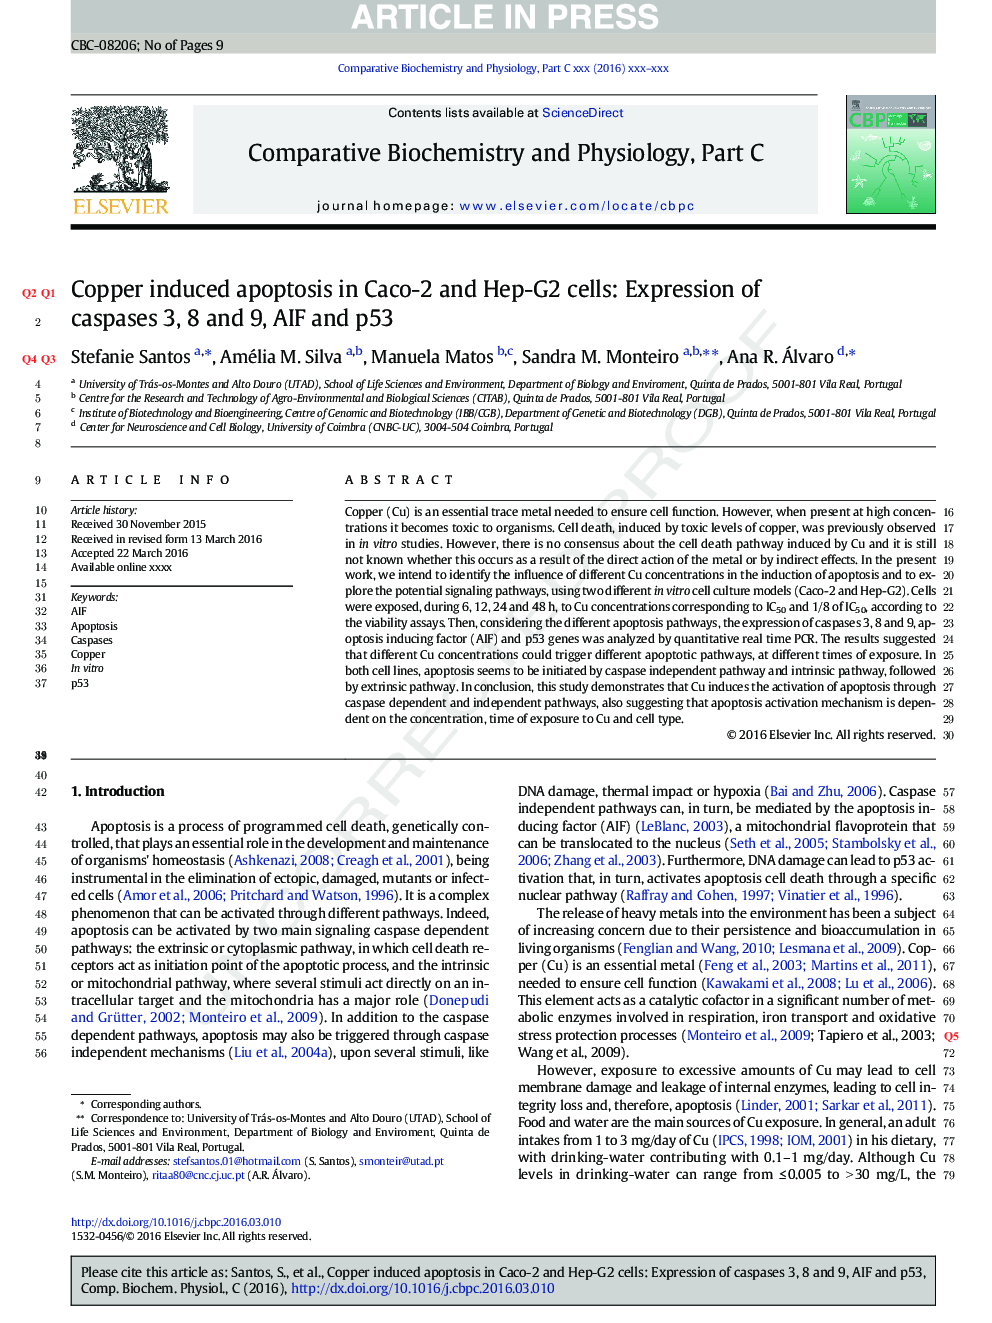 Copper induced apoptosis in Caco-2 and Hep-G2 cells: Expression of caspases 3, 8 and 9, AIF and p53